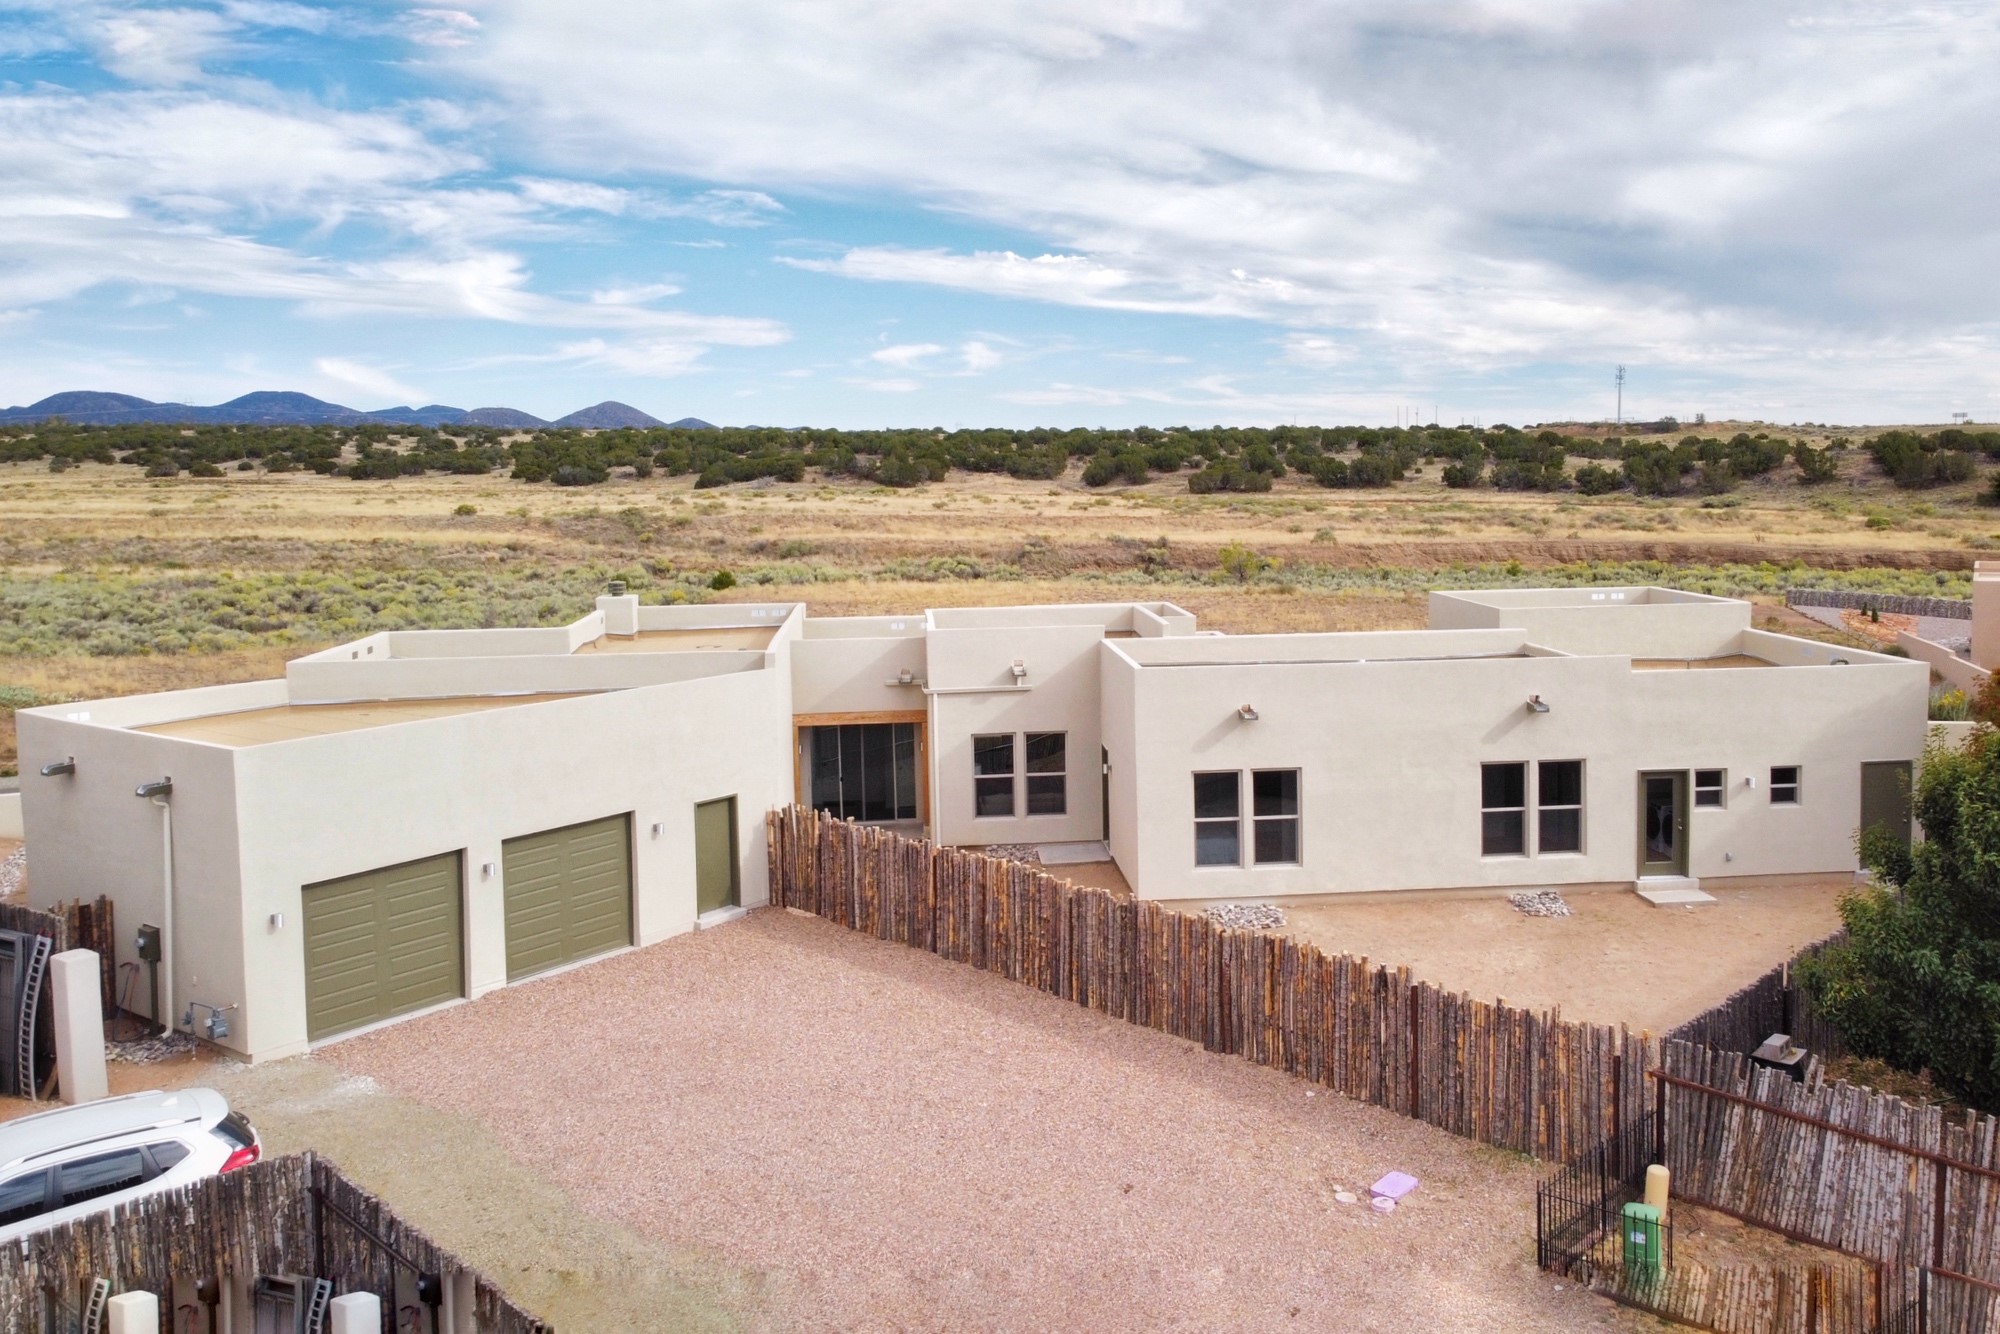 39 Willow Back, Santa Fe, New Mexico 87508, 3 Bedrooms Bedrooms, ,3 BathroomsBathrooms,Residential,For Sale,39 Willow Back,202335241